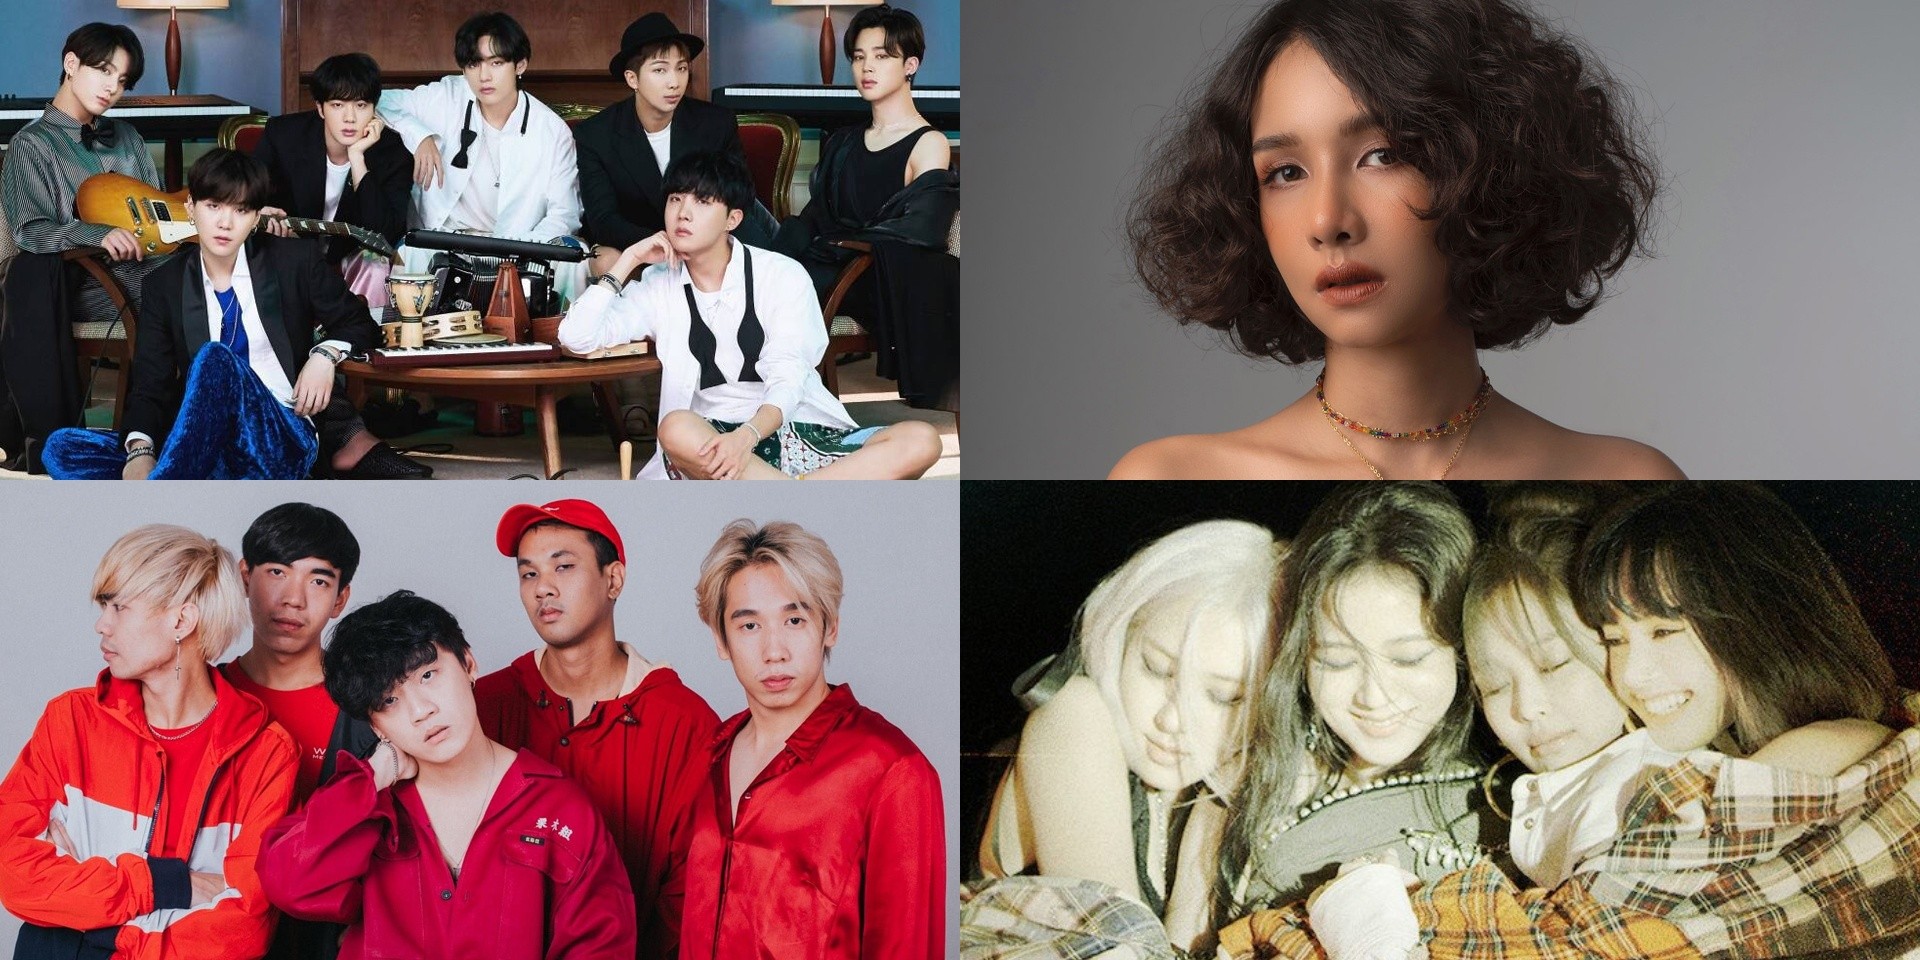 BTS, BLACKPINK, Three Man Down, BOWKYLION top the charts in Spotify 2020 Wrapped Thailand